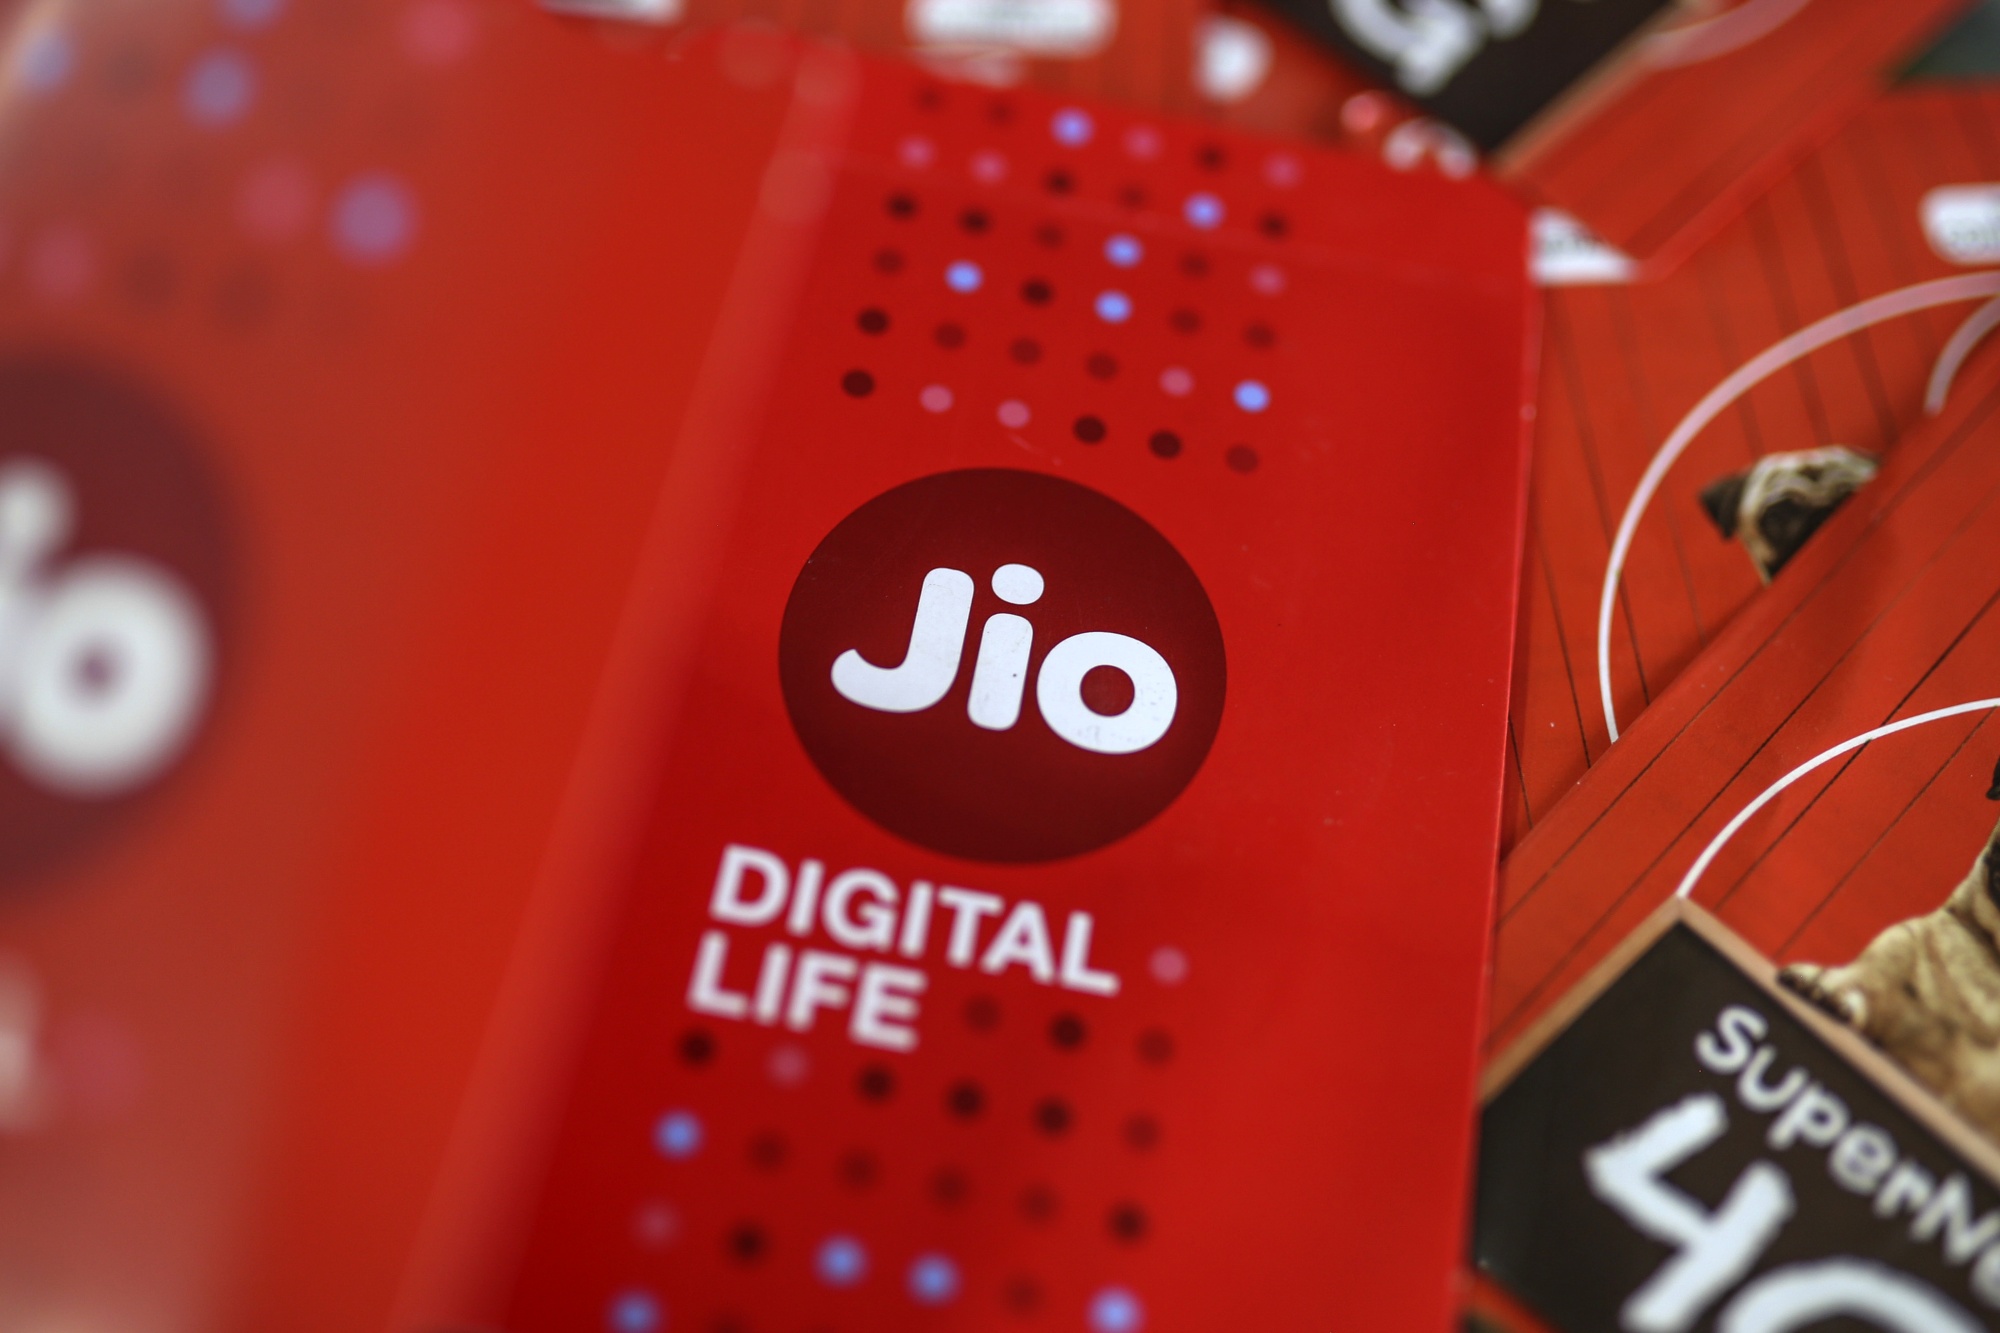 Top Jio Digital Life Galleries in Saraidhela, Dhanbad - Best Mobile  Services - Justdial